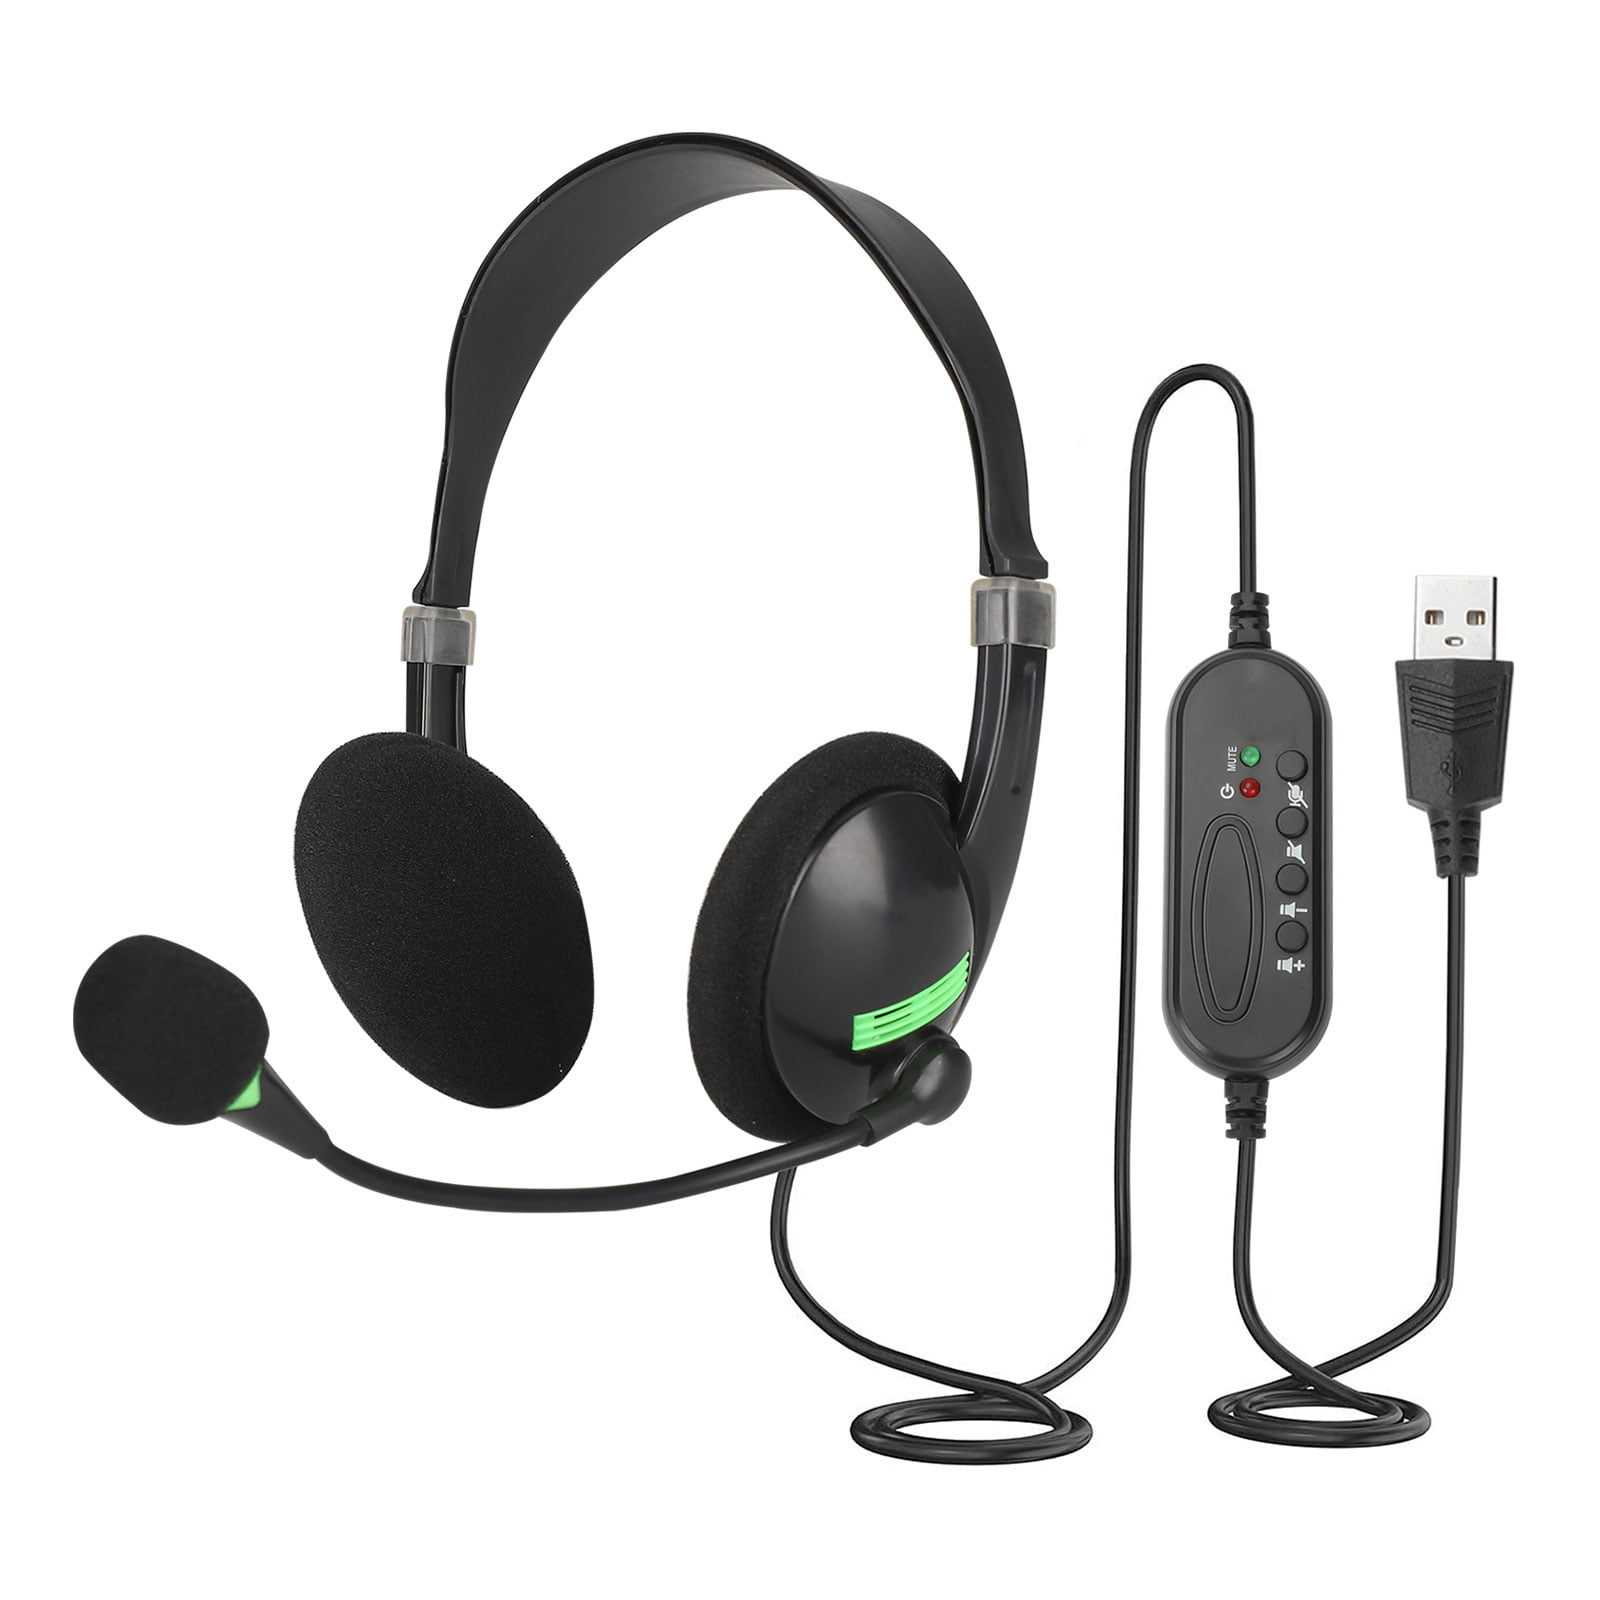 Headset with Microphone Noise Cancelling Headphones with USB Plug for Computer and Laptop Volume Control and Mute Switch Business Call Center Office Super Light Clearer Voice 